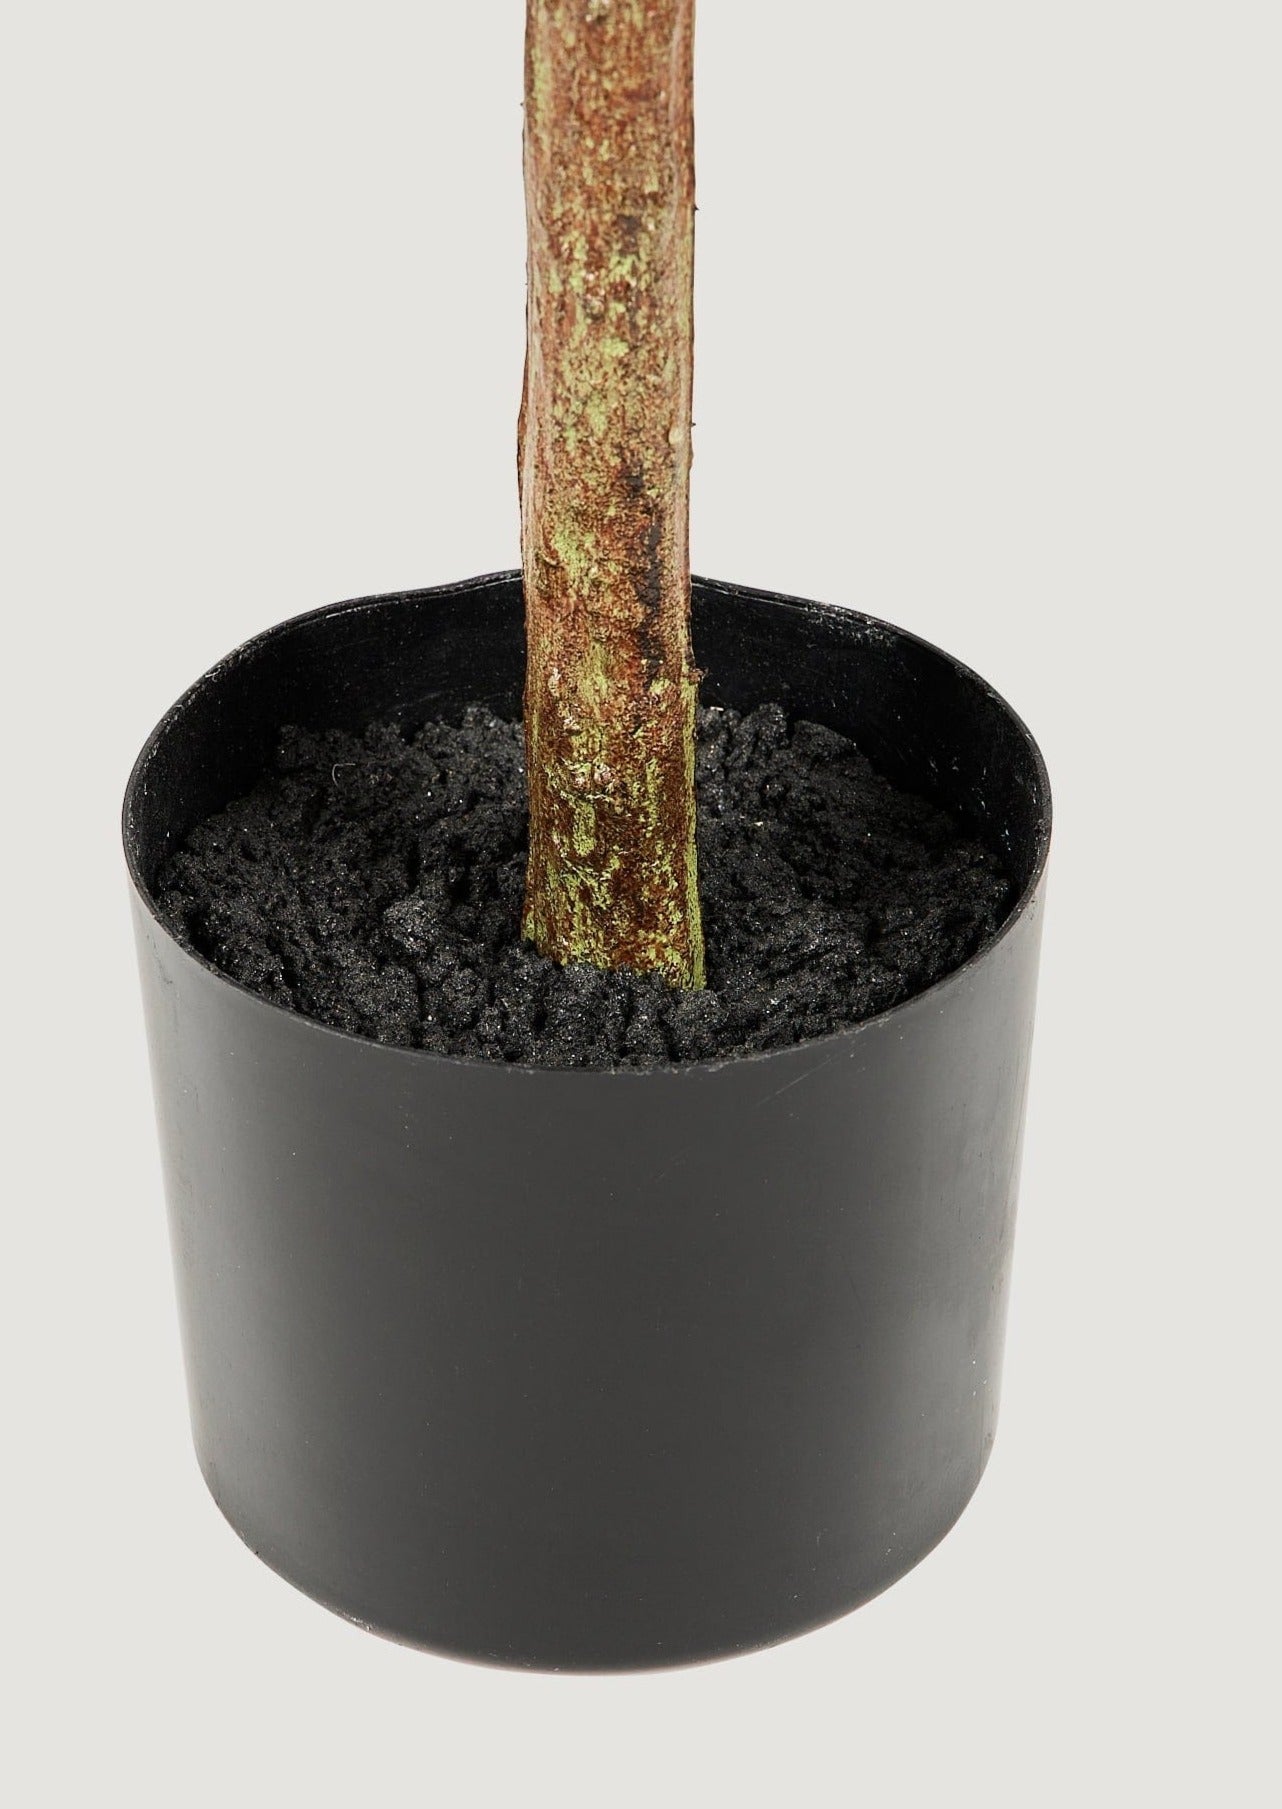 Afloral Artificial Eucalyptus Tree Potted in Black Pot